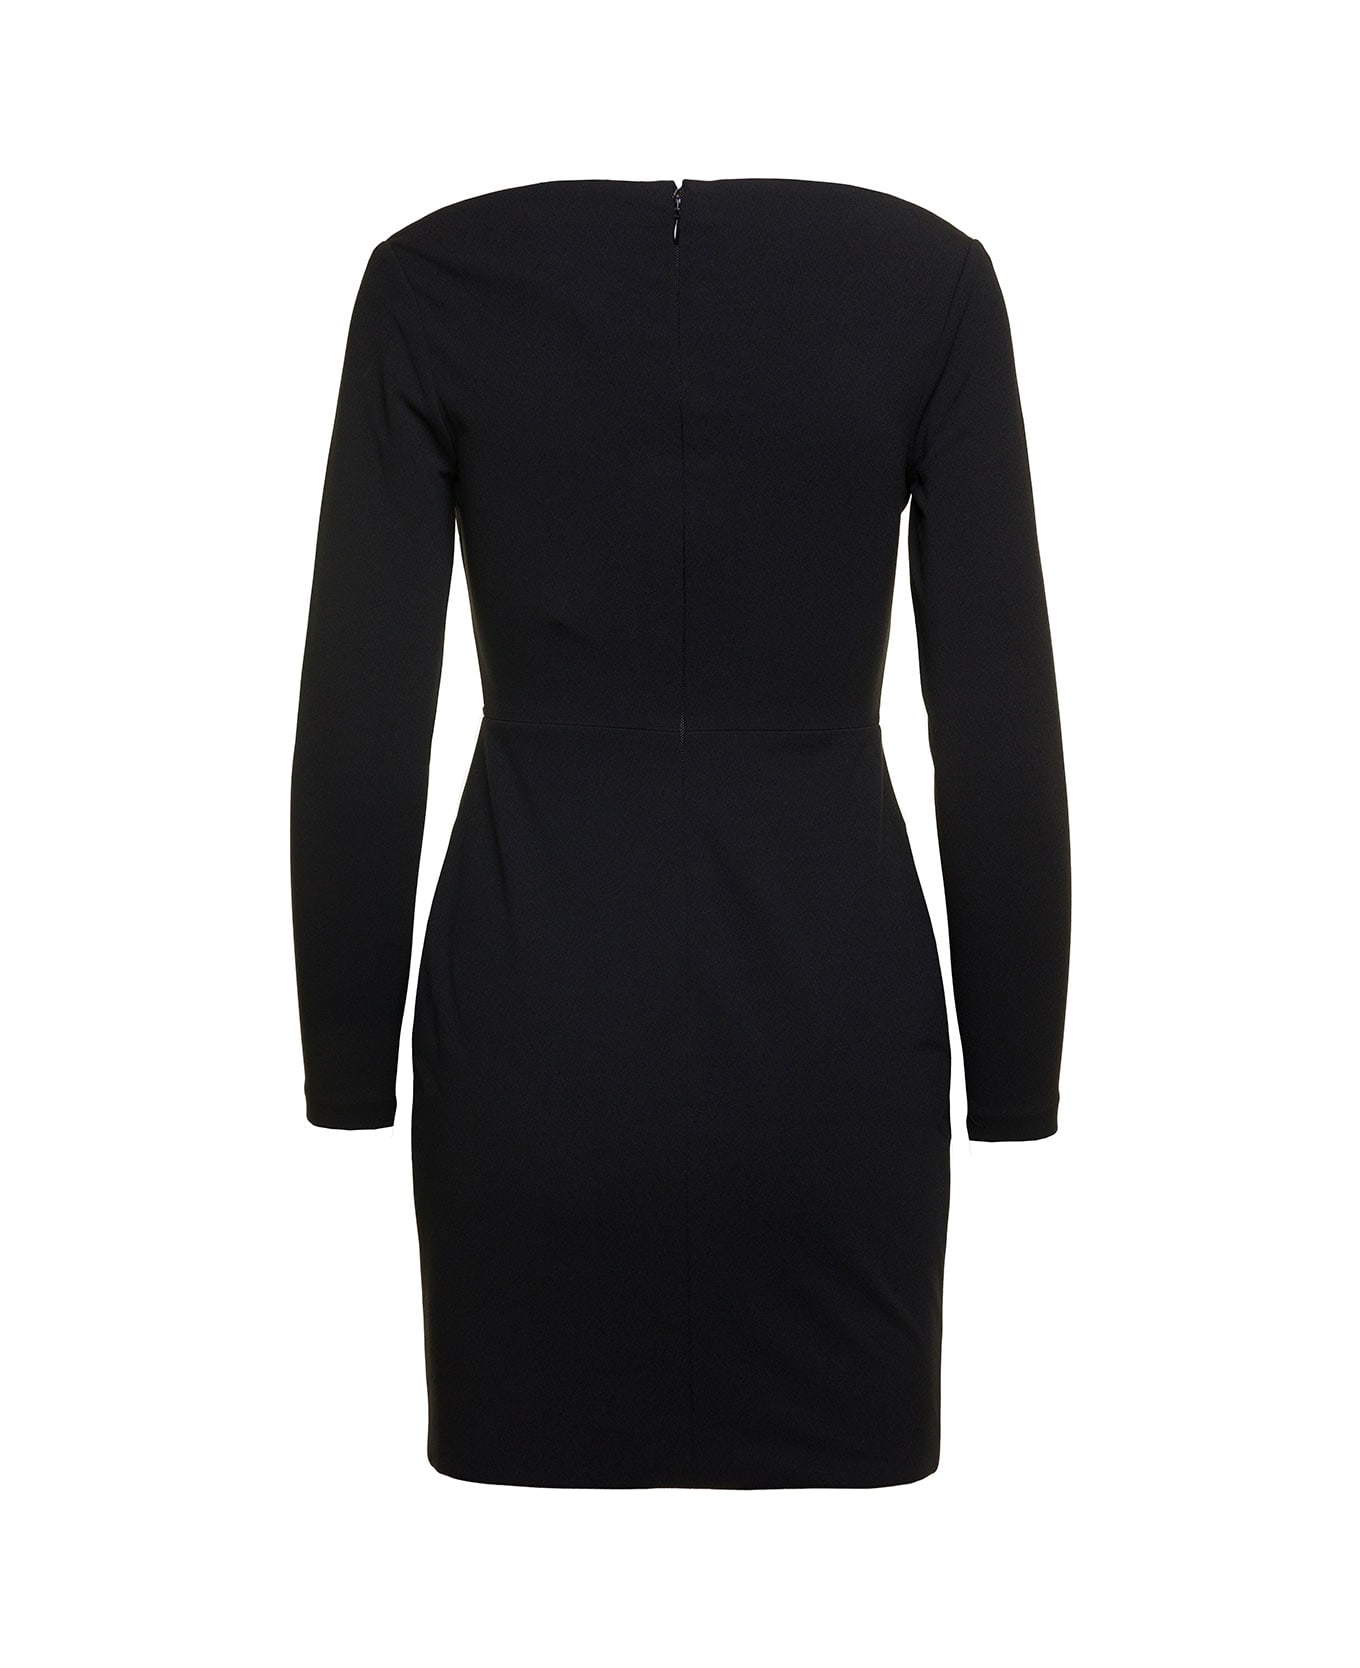 Solace London Black ' Uma' Mini Dress With Long Sleeves And U-neck In Polyester Woman - Black